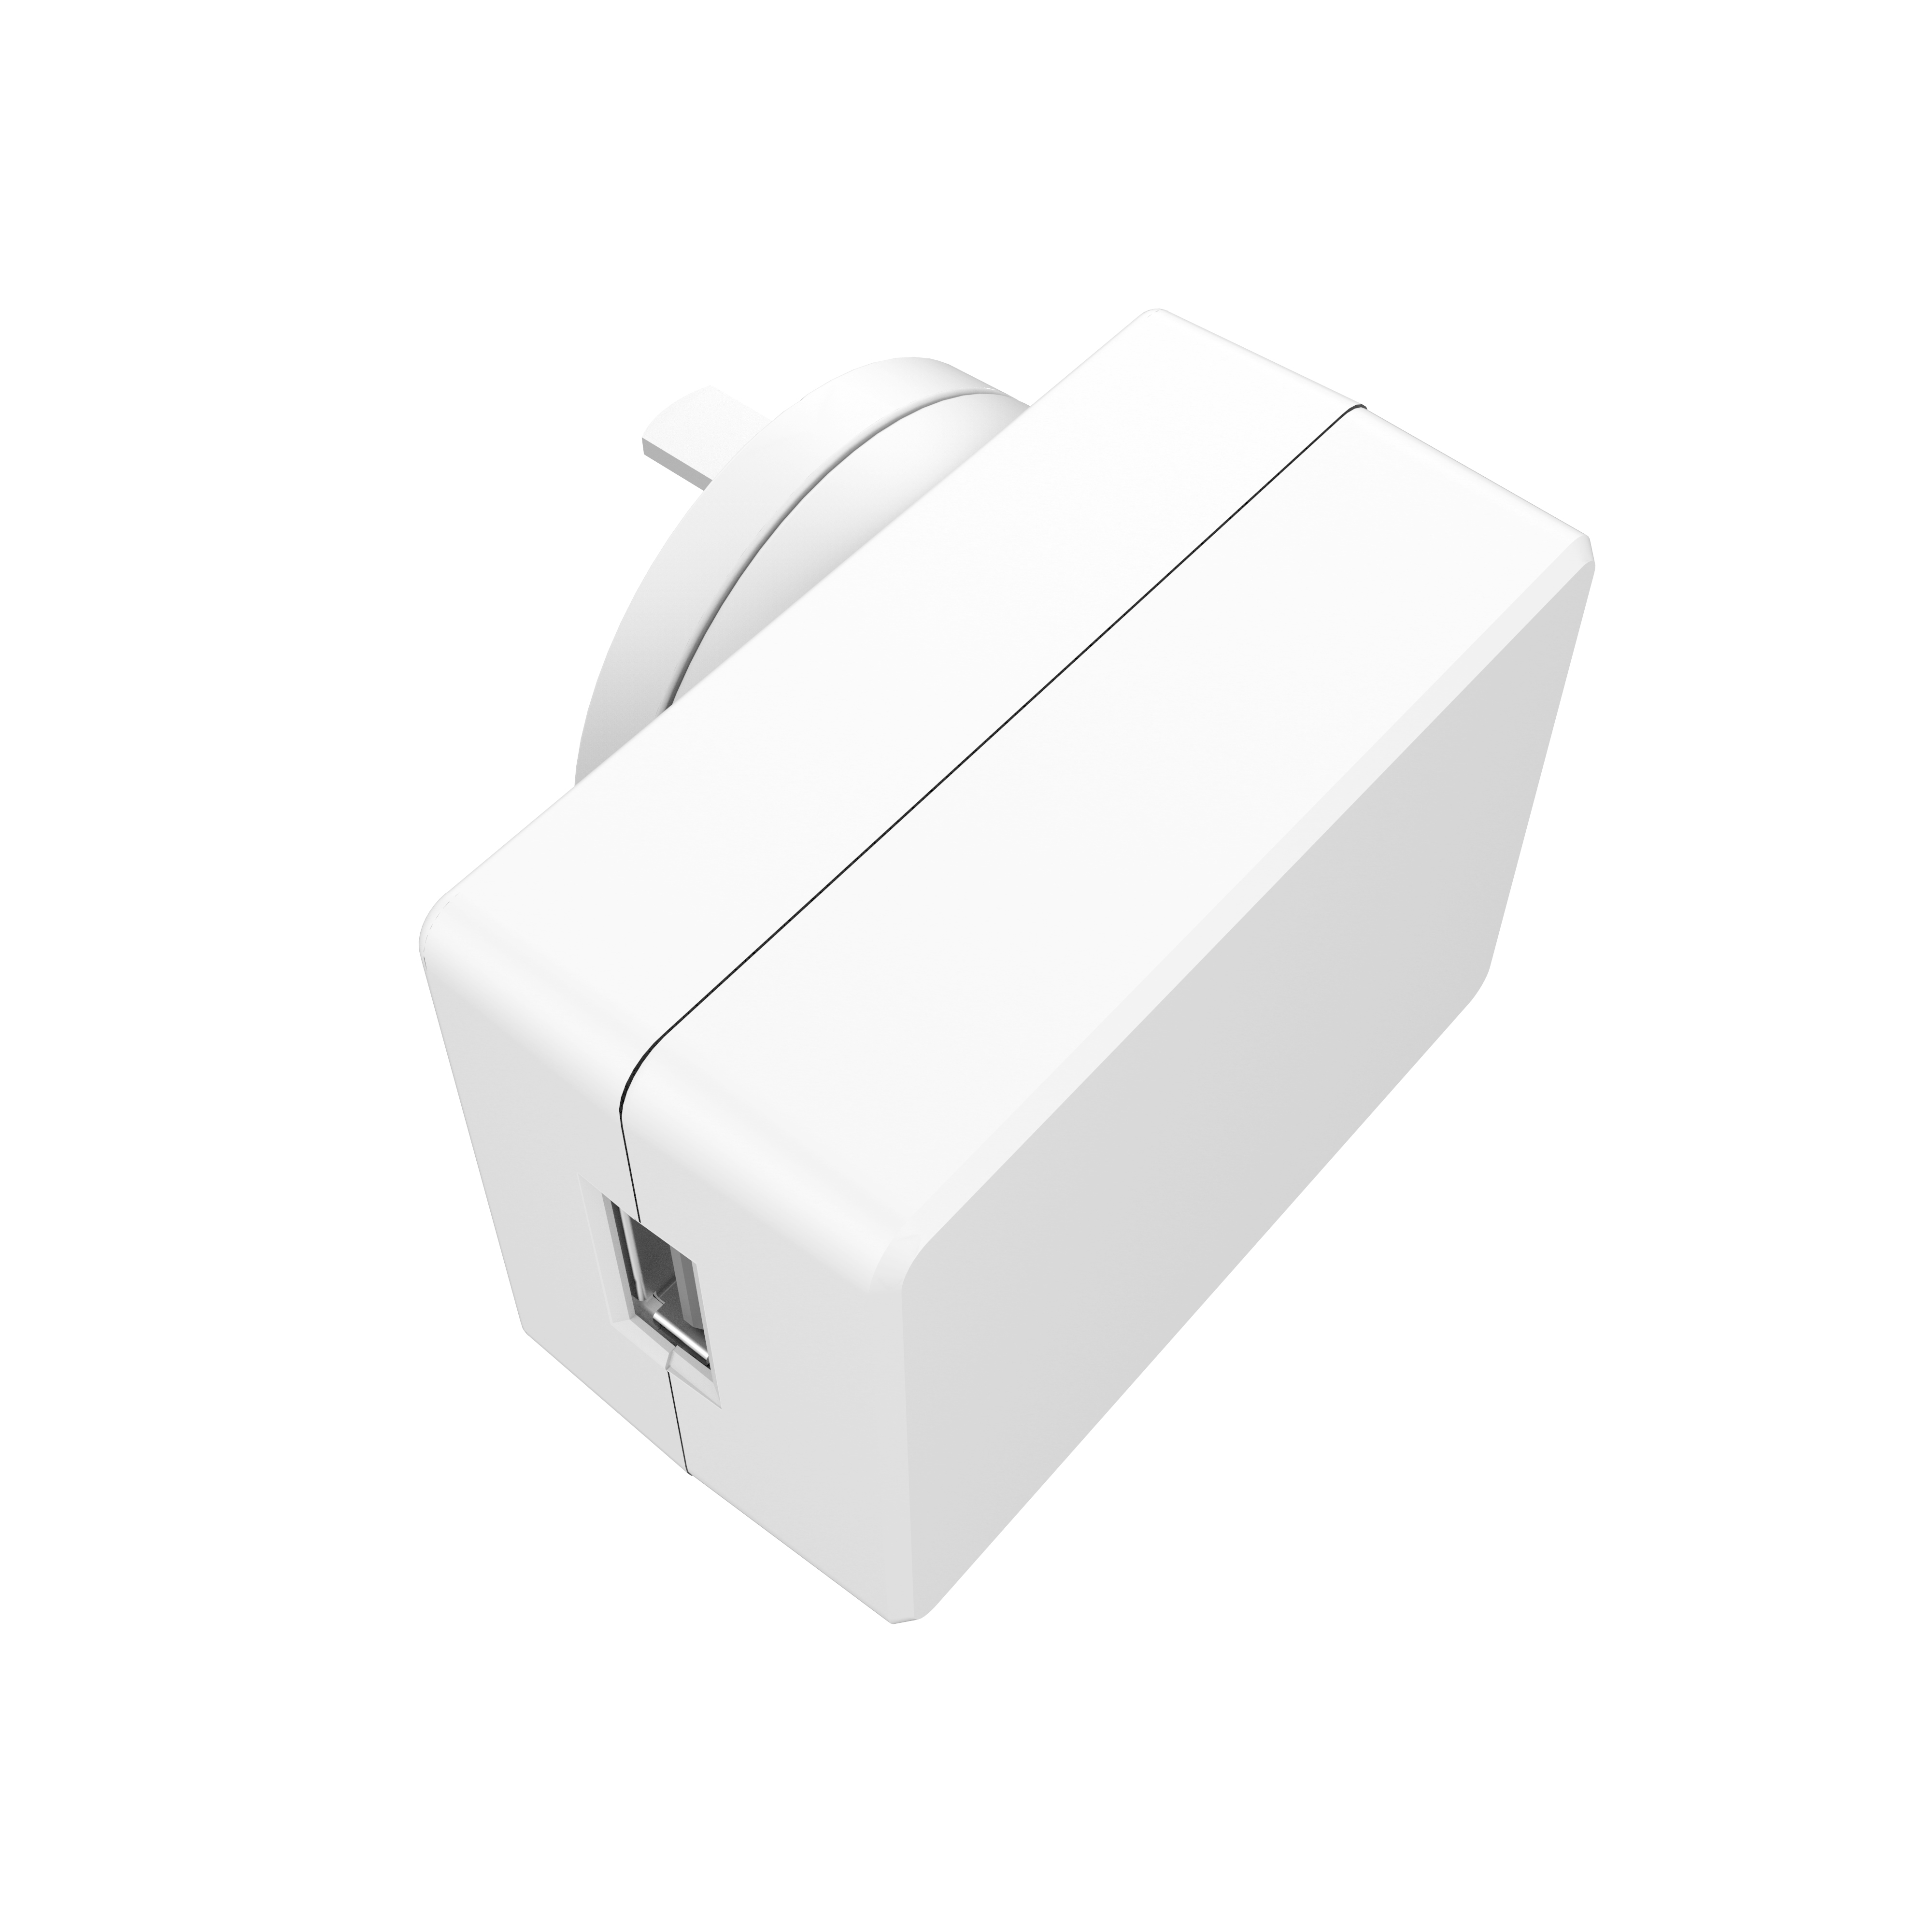 White 5V 2A 2.5A 3A BIS Plug Power Adapter SMPS Indian Switching Power Supply USB Adaptor Charger India Market BIS Certificate